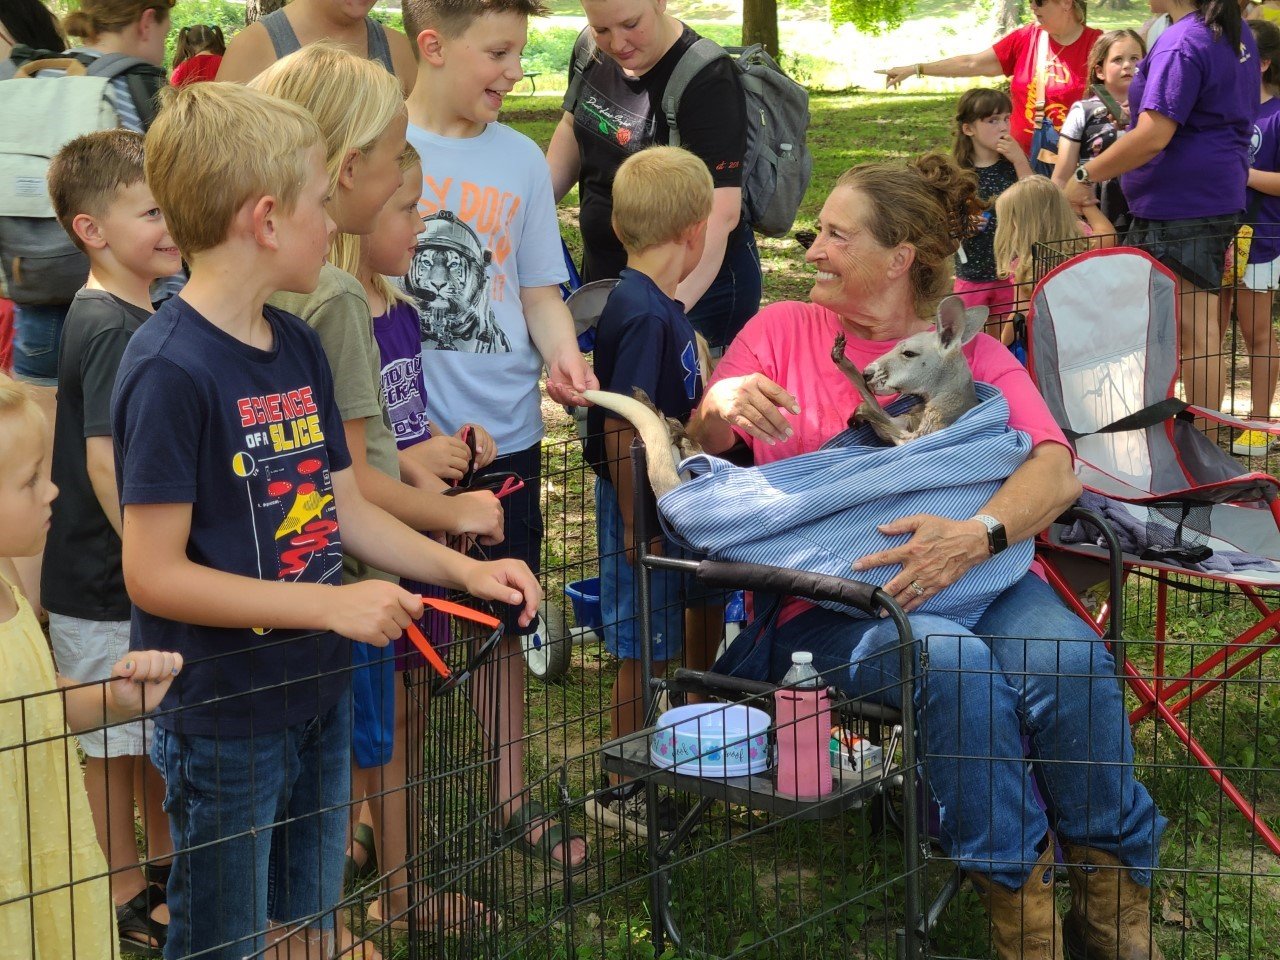 Kramer Livestock and Petting Zoo brought a one-year-old kangaroo named Wiggles for the children to see in Lincoln Park at the Pittsburg Public Library-sponsored event.